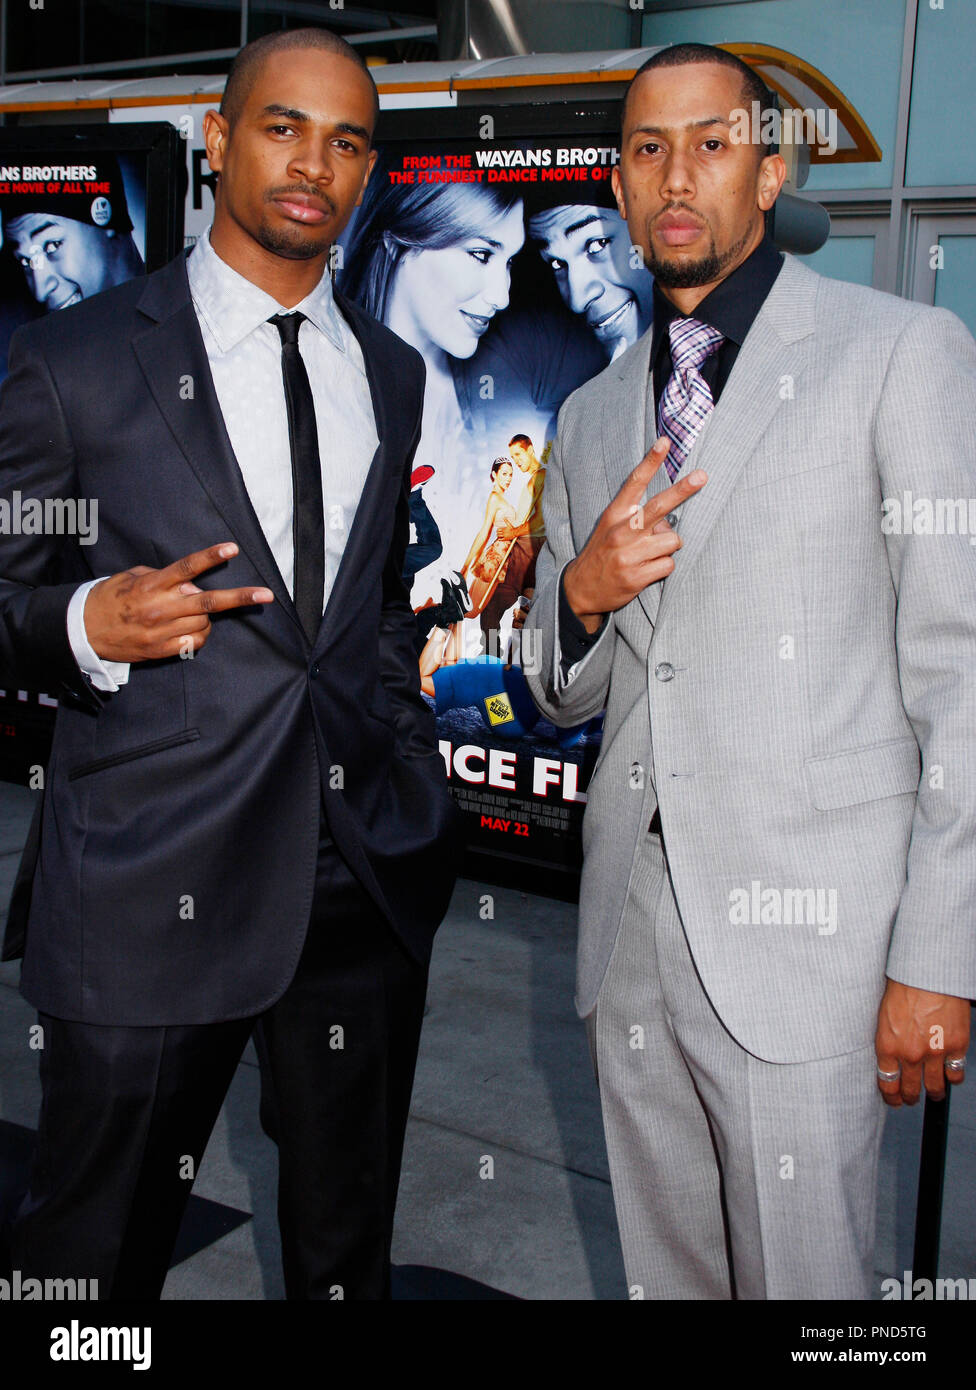 Damon Wayans Jr at the Los Angeles Premiere of DANCE FLICK held at the Arclight Theatres in Hollywood, CA on Wednesday, May 20, 2009. Photo by PRPP / PictureLux  File Reference # Damon Wayans Jr Affion 05202009 01PRPP  For Editorial Use Only -  All Rights Reserved Stock Photo